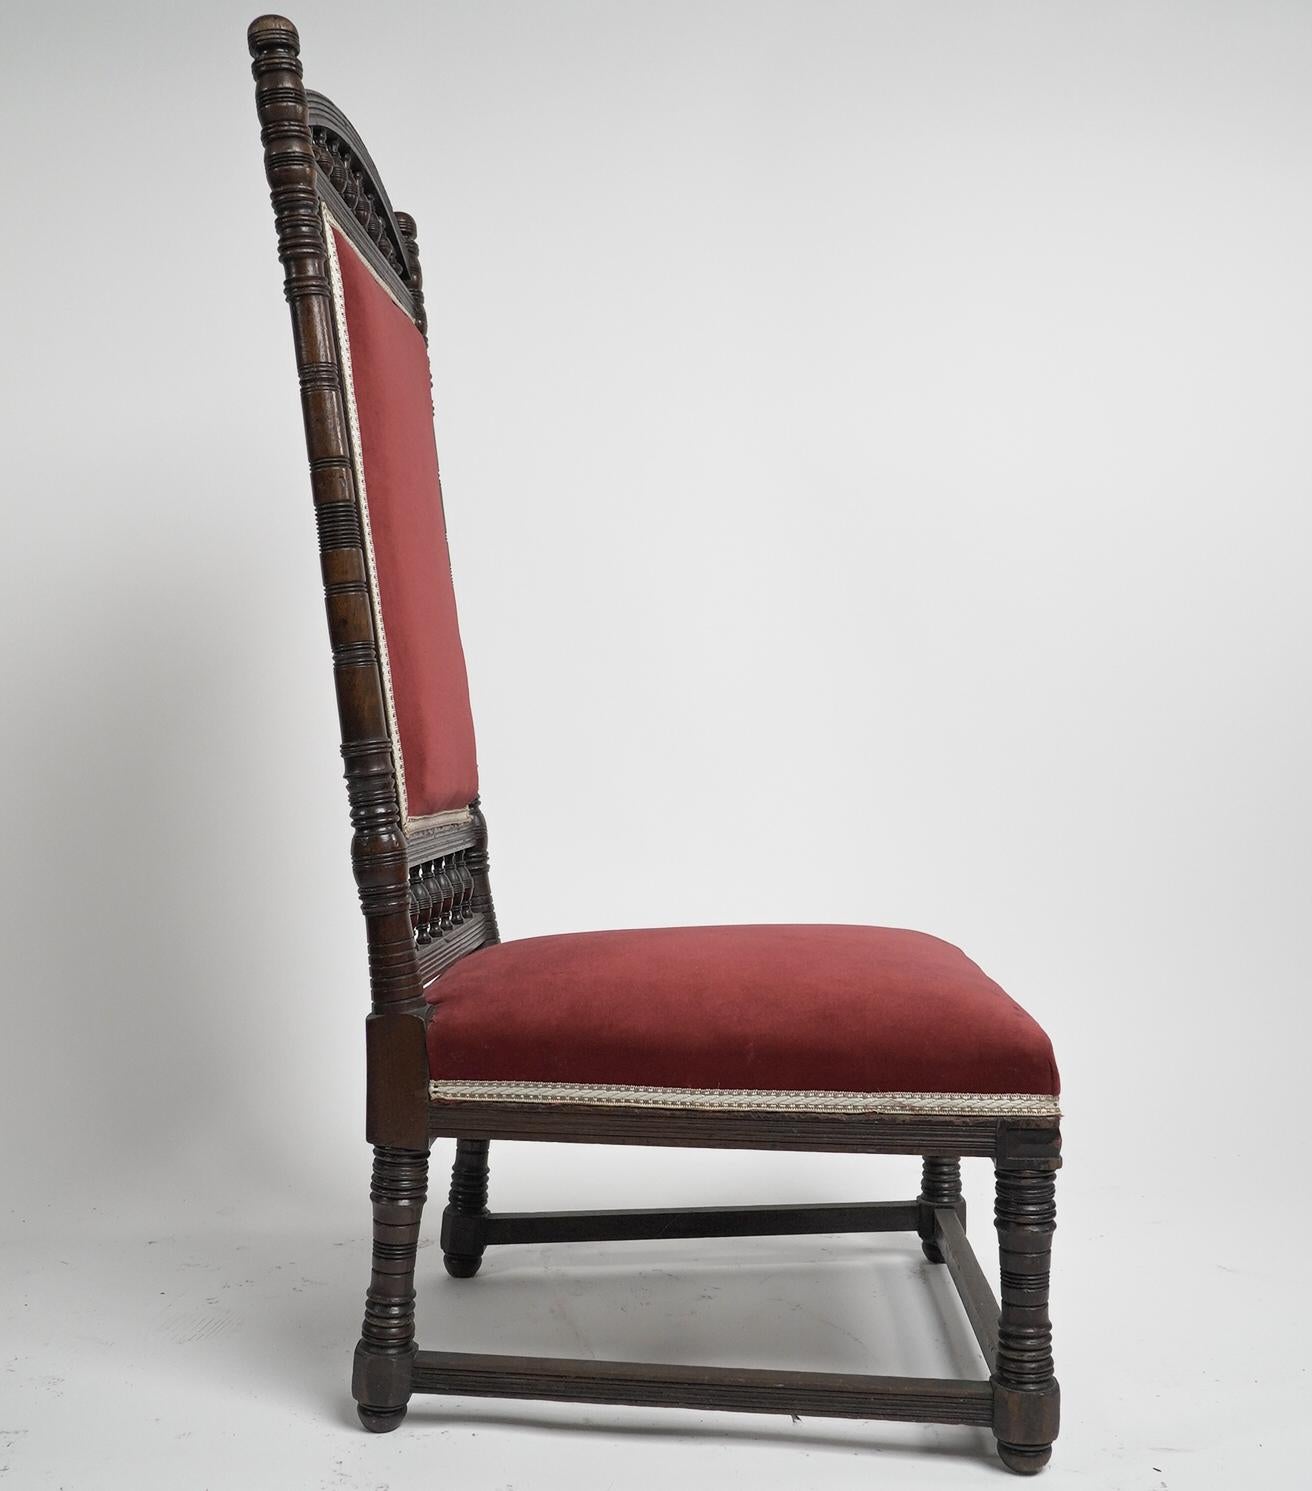 English Thomas Edward Collcutt for Collinson & Lock. Aesthetic Movement high back chair. For Sale